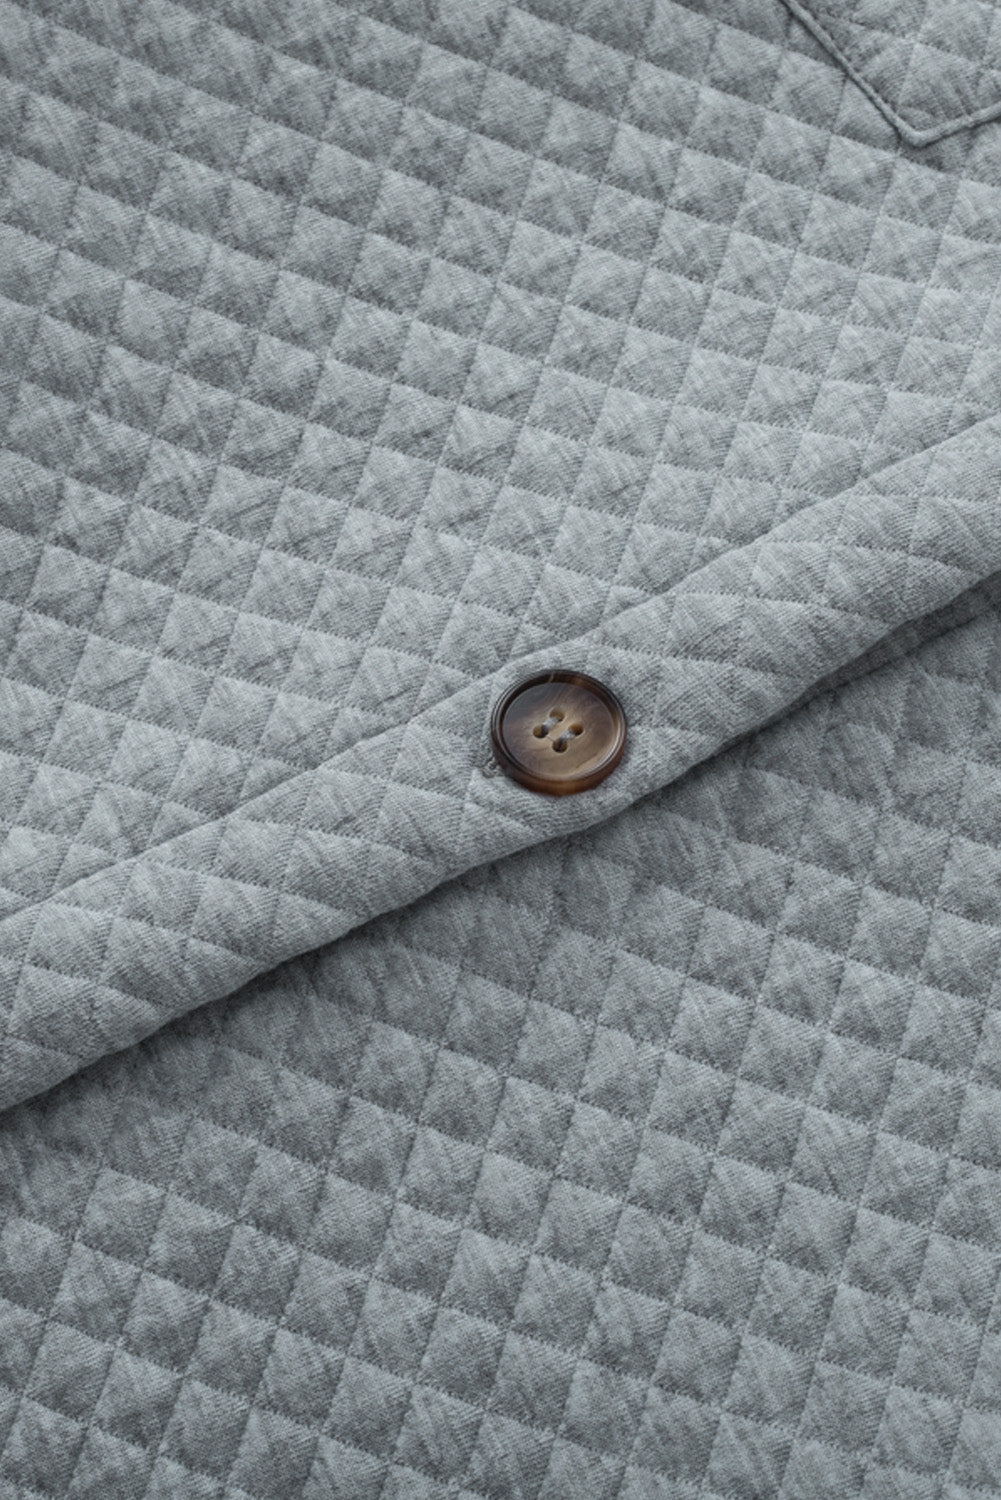 Gray Retro Quilted Flap Pocket Button Shacket